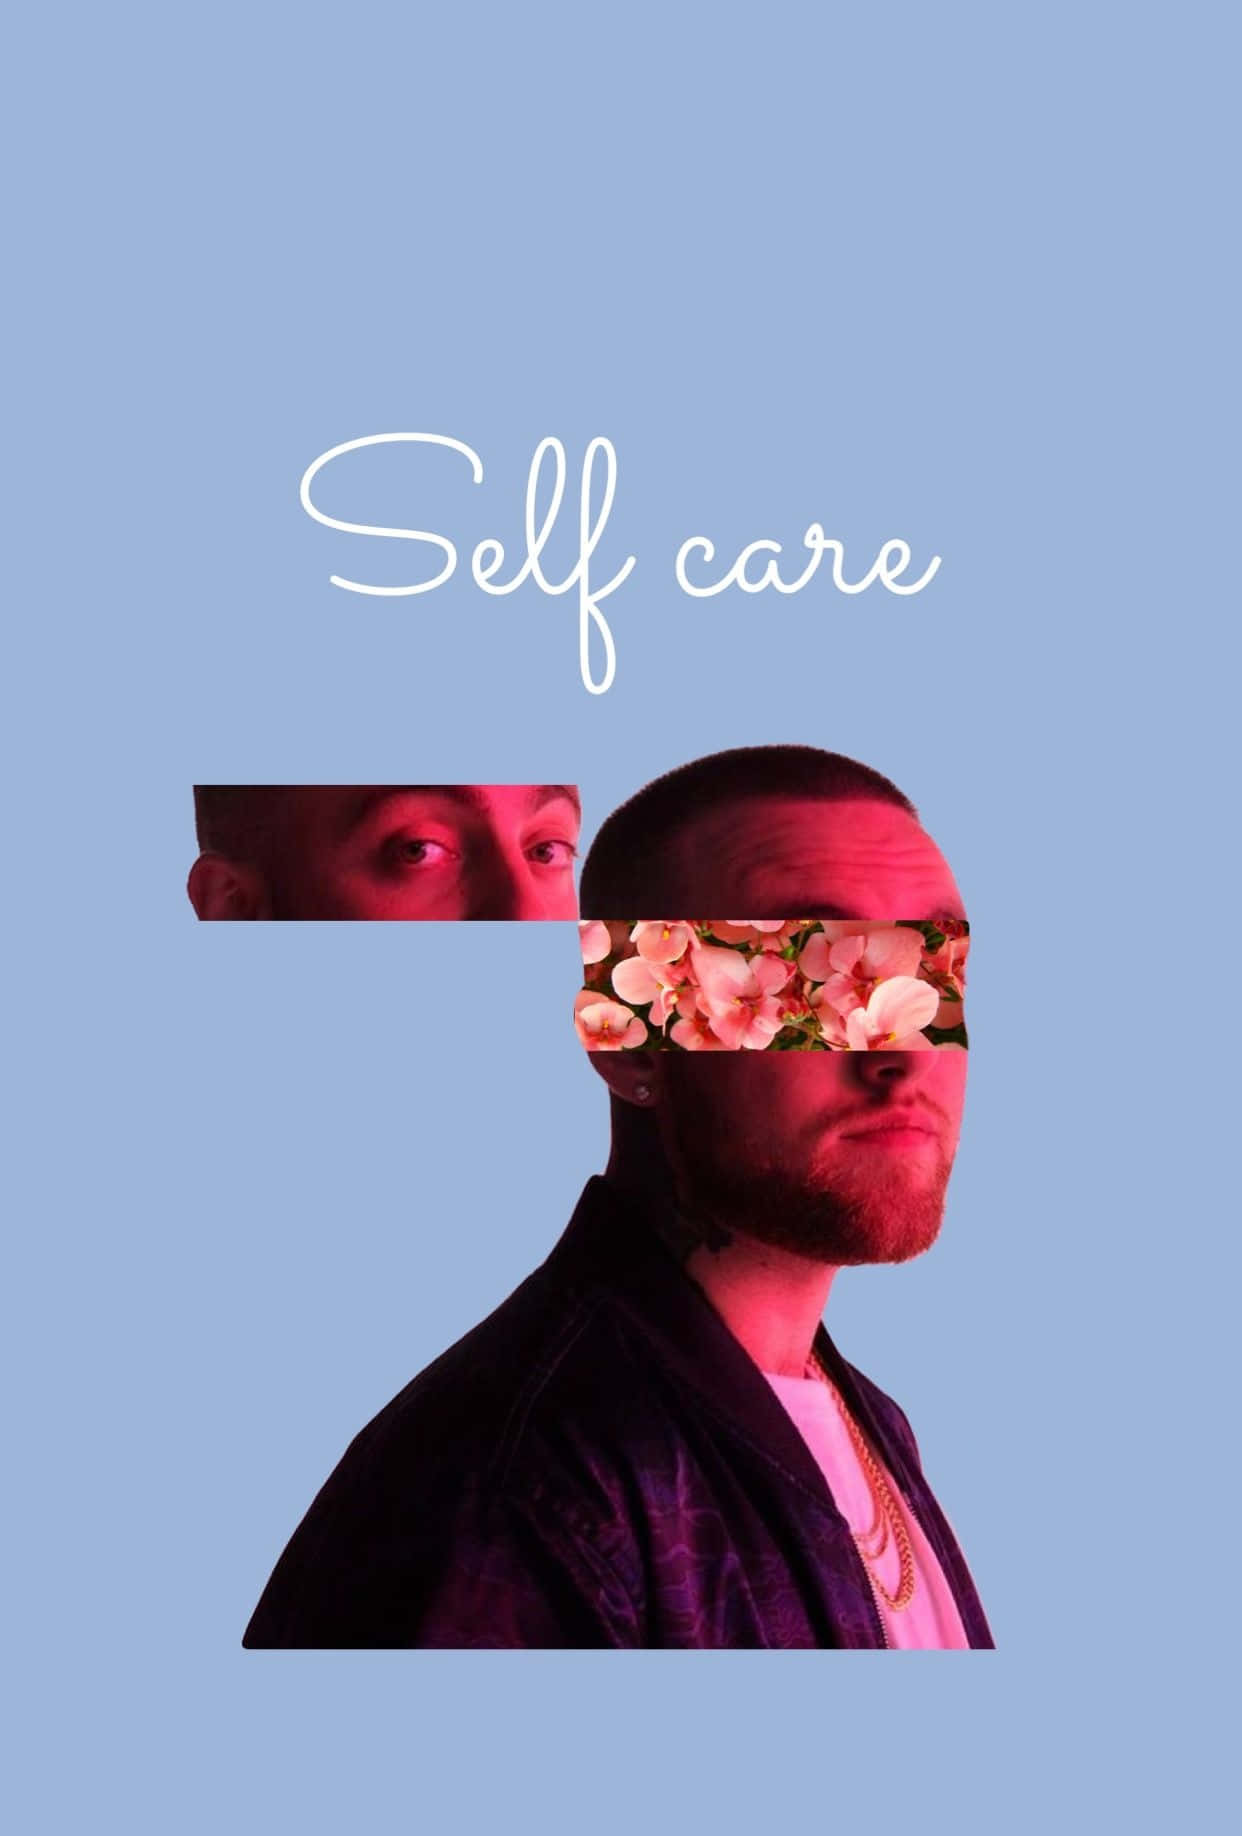 Start your day with self-care - look after yourself first! Wallpaper